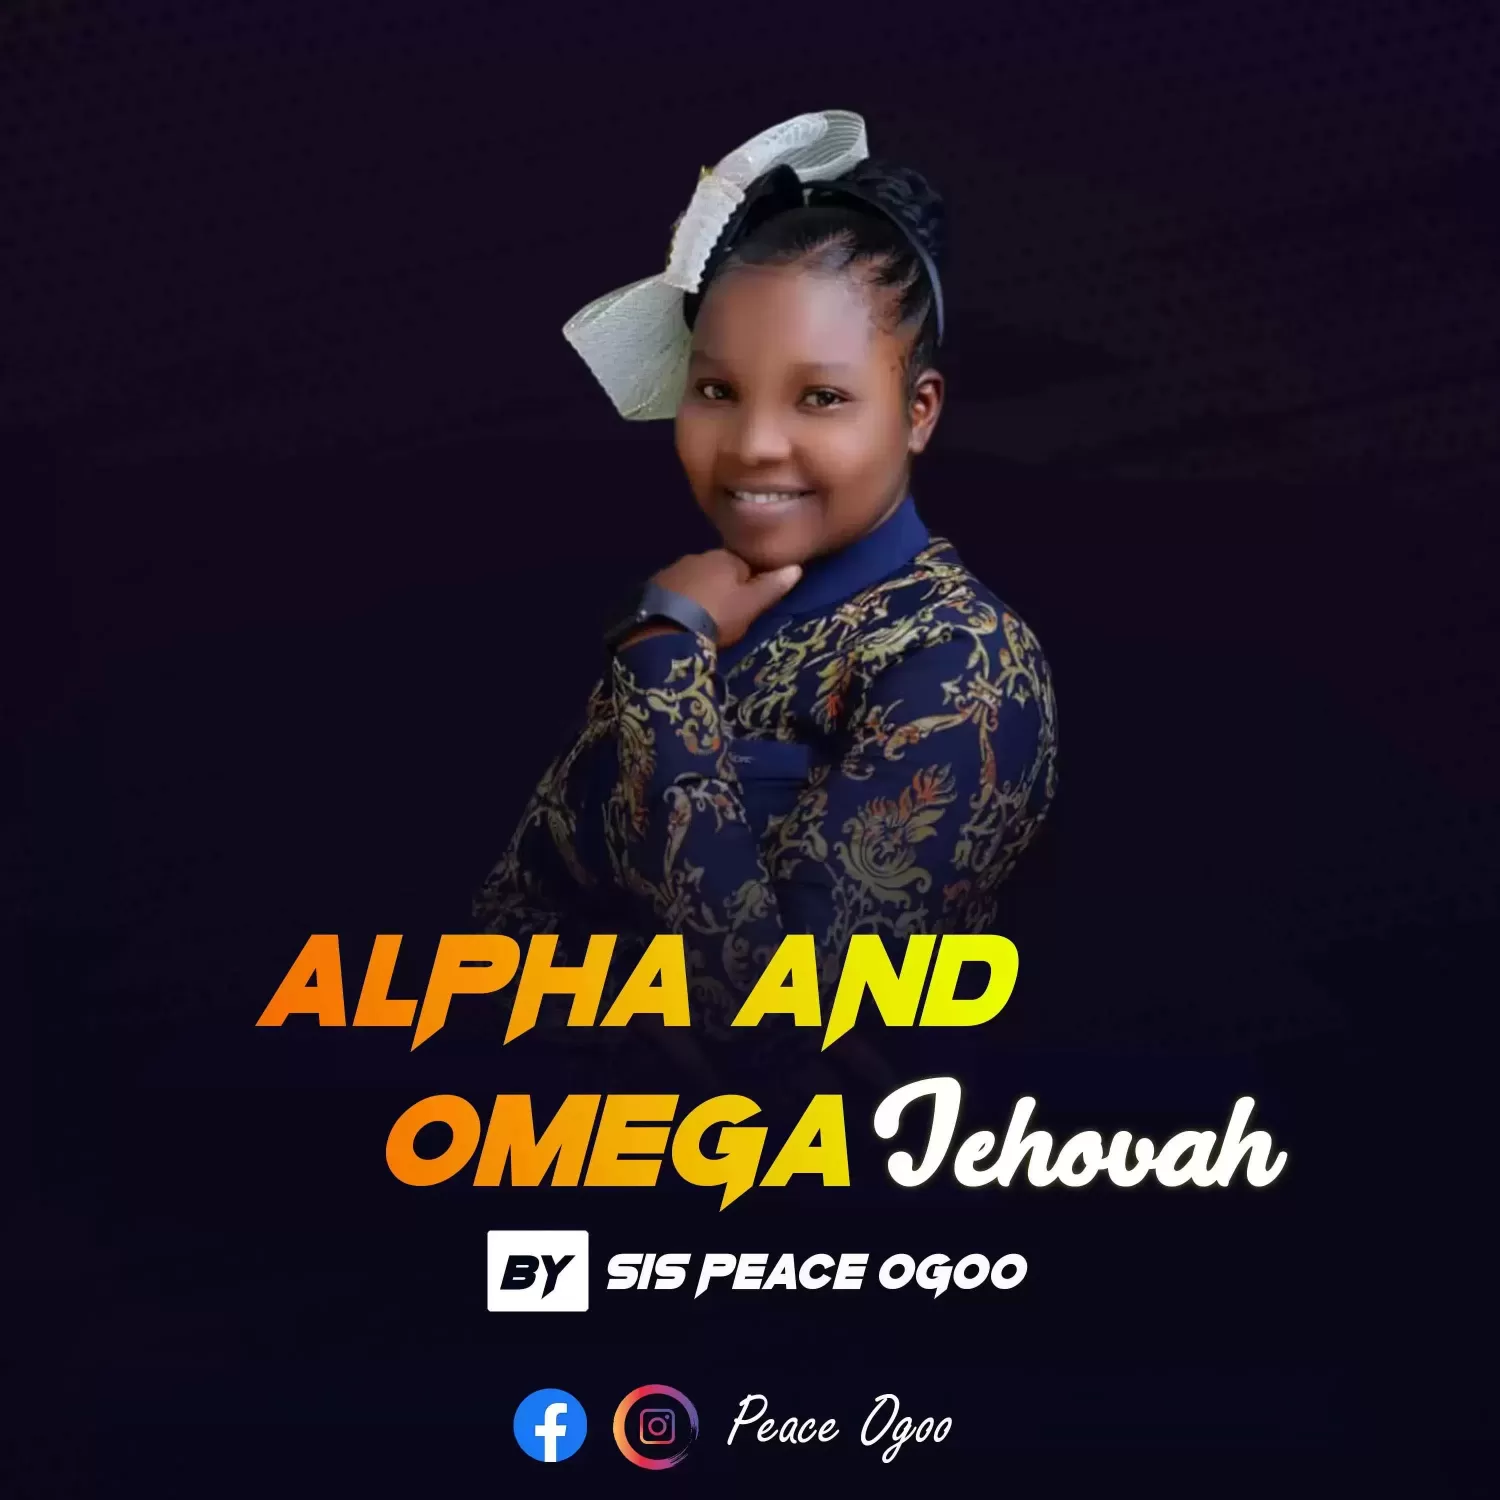 Alpha and Omega Jehovah by Sis Peace Ogoo